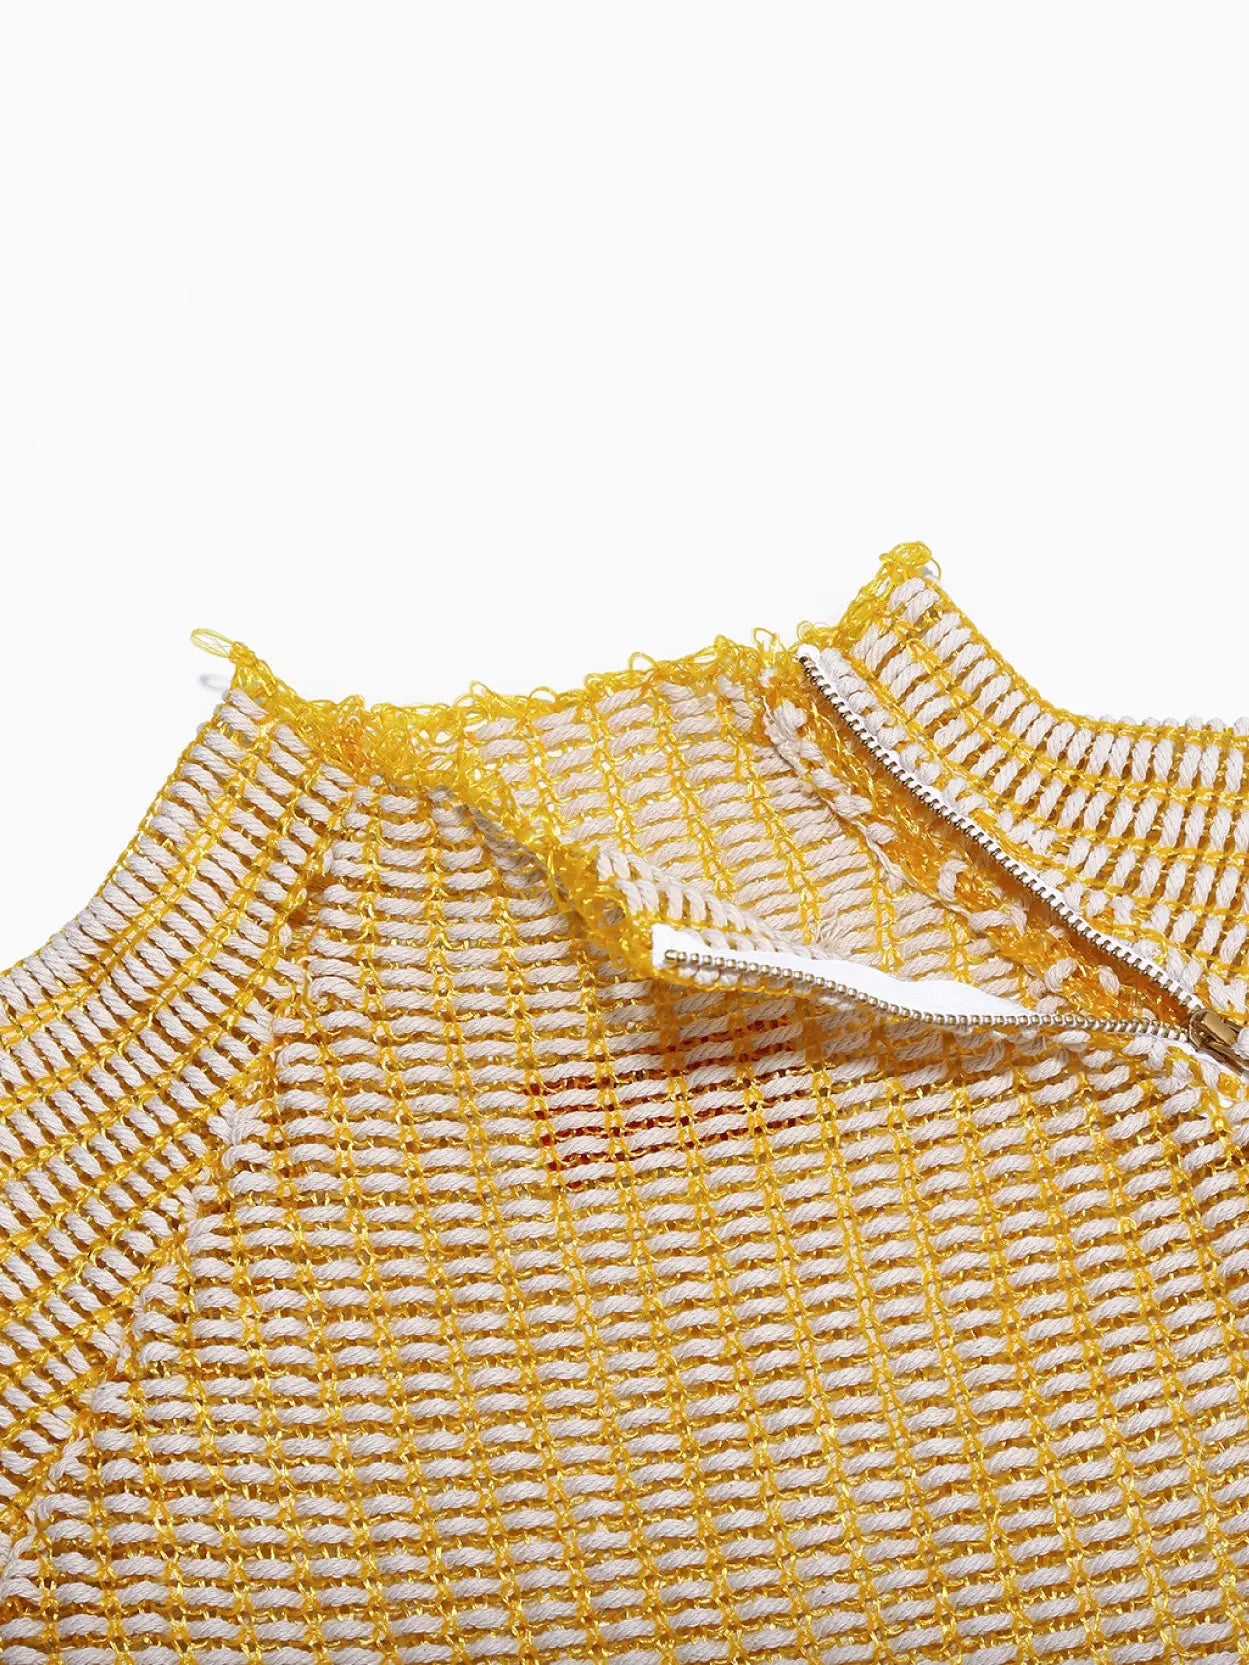 A Keya Sweater Yellow from Bielo with wide, short sleeves and a mock neck. The sweater features a loose, casual fit and a textured pattern. It is laid flat against a plain, white background.